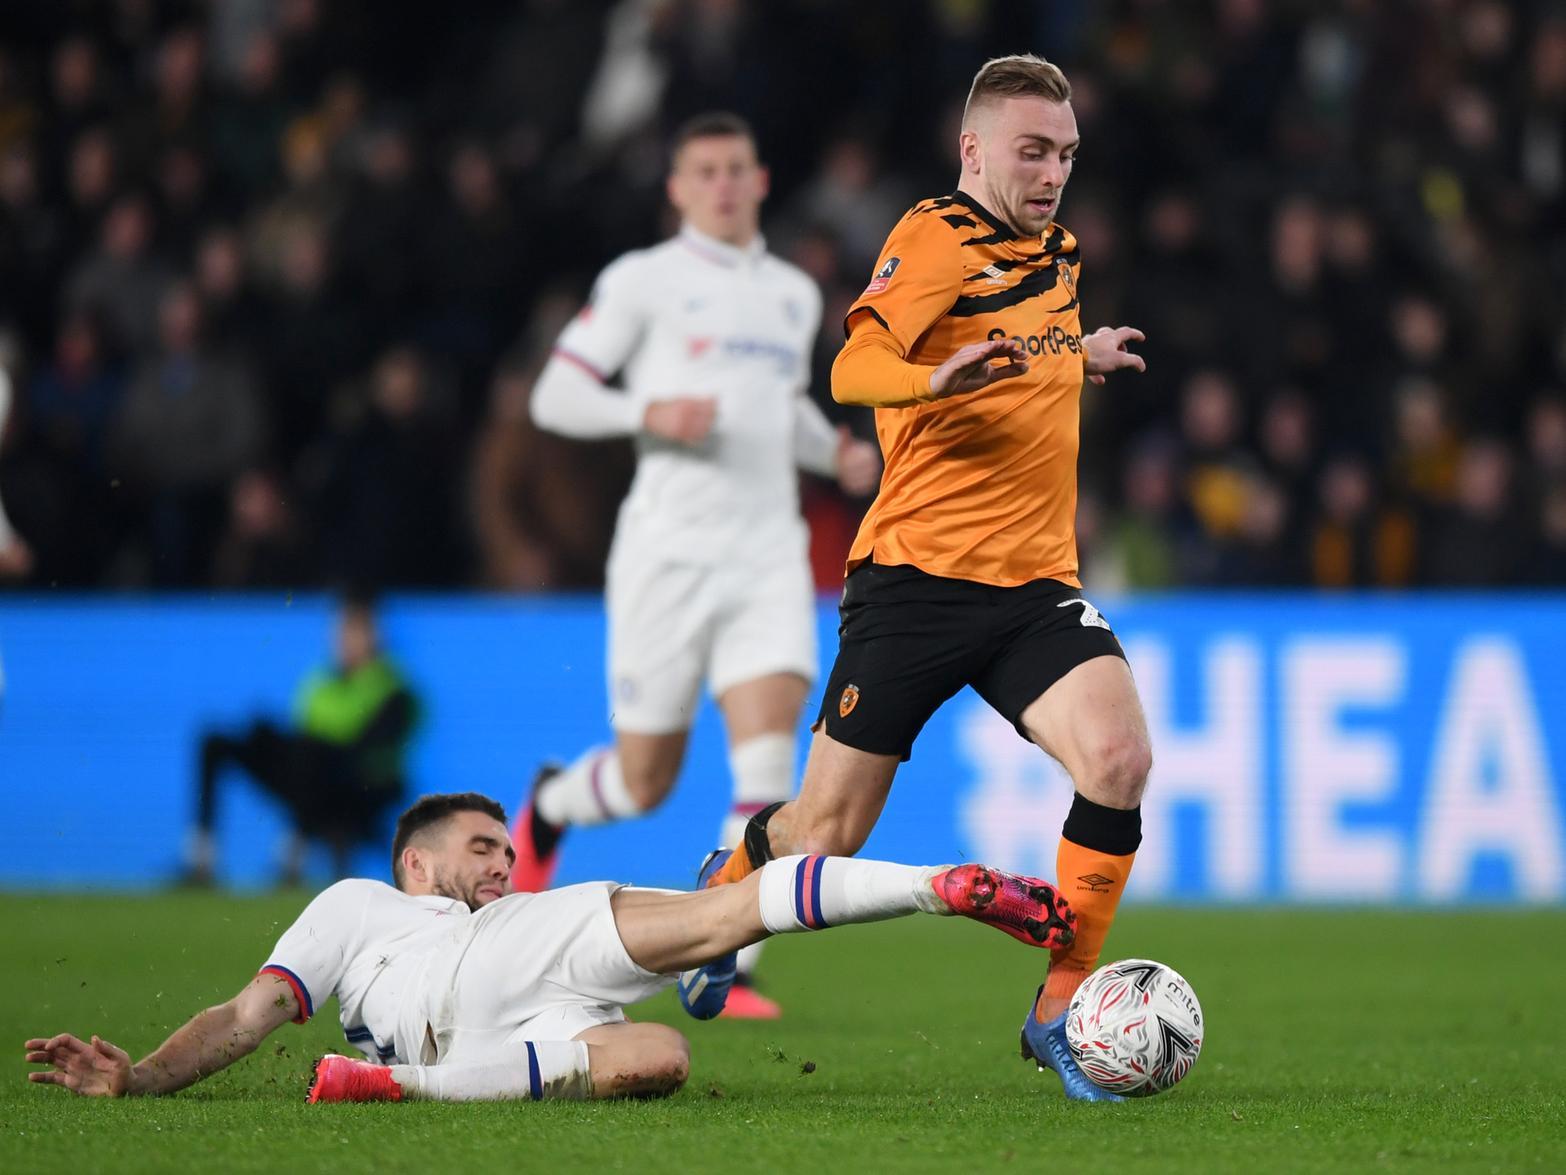 Bowen has been sensational for Hull City, scoring goals for fun and almost single-handedly keeping the Tigers within the play-off picture. Will anyone stump up the cash to take him away before deadline day?